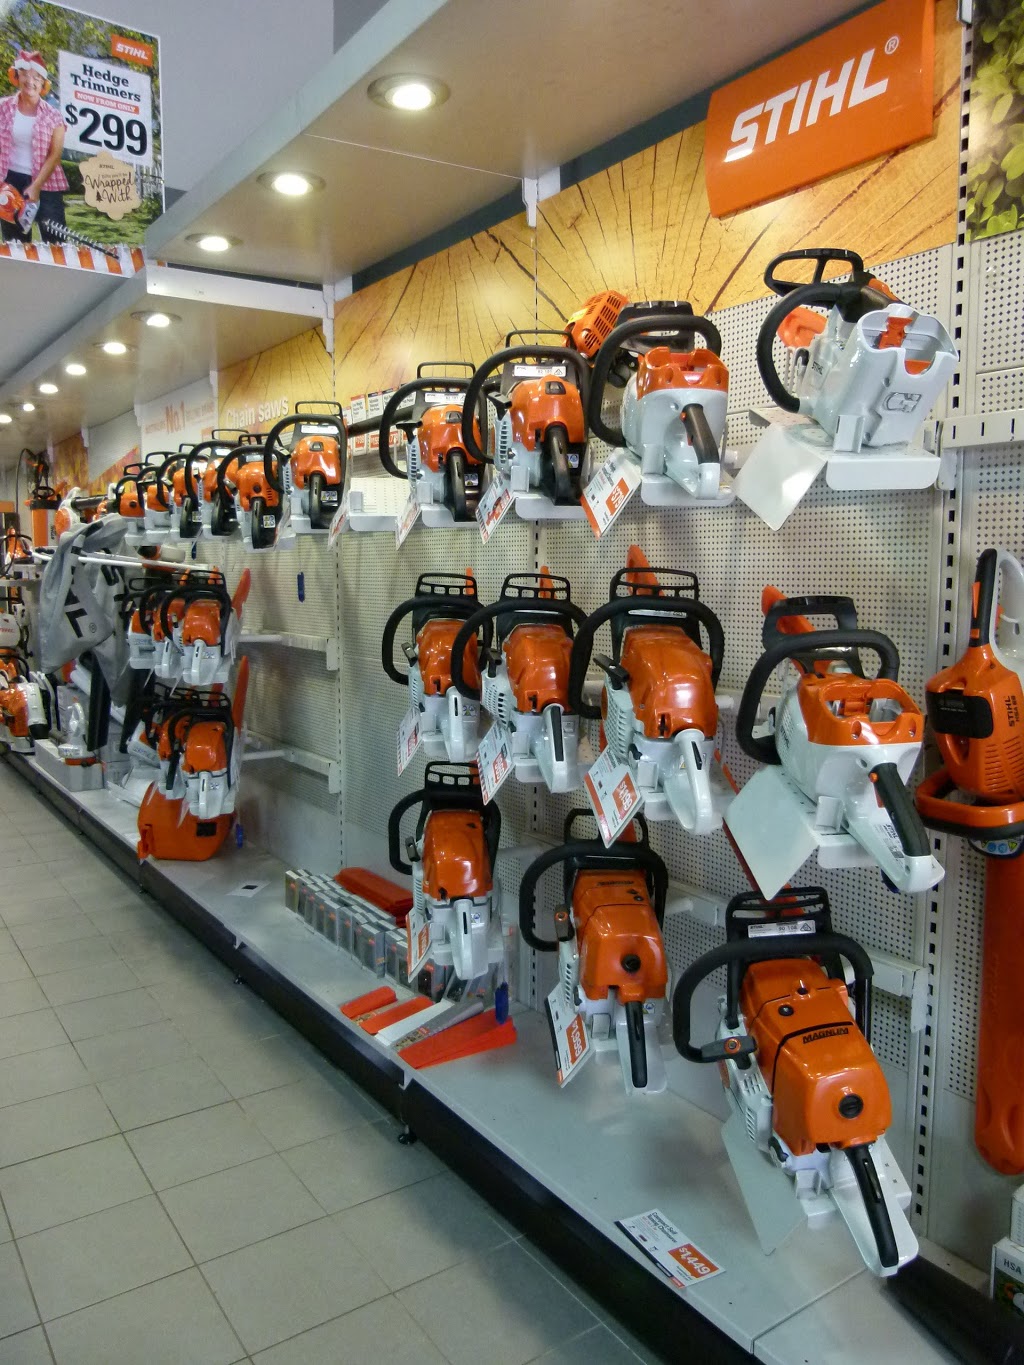 Prompt Mowers Carlingford | store | 1/639 - 641 Pennant Hills Rd, Carlingford NSW 2118, Australia | 0298721841 OR +61 2 9872 1841